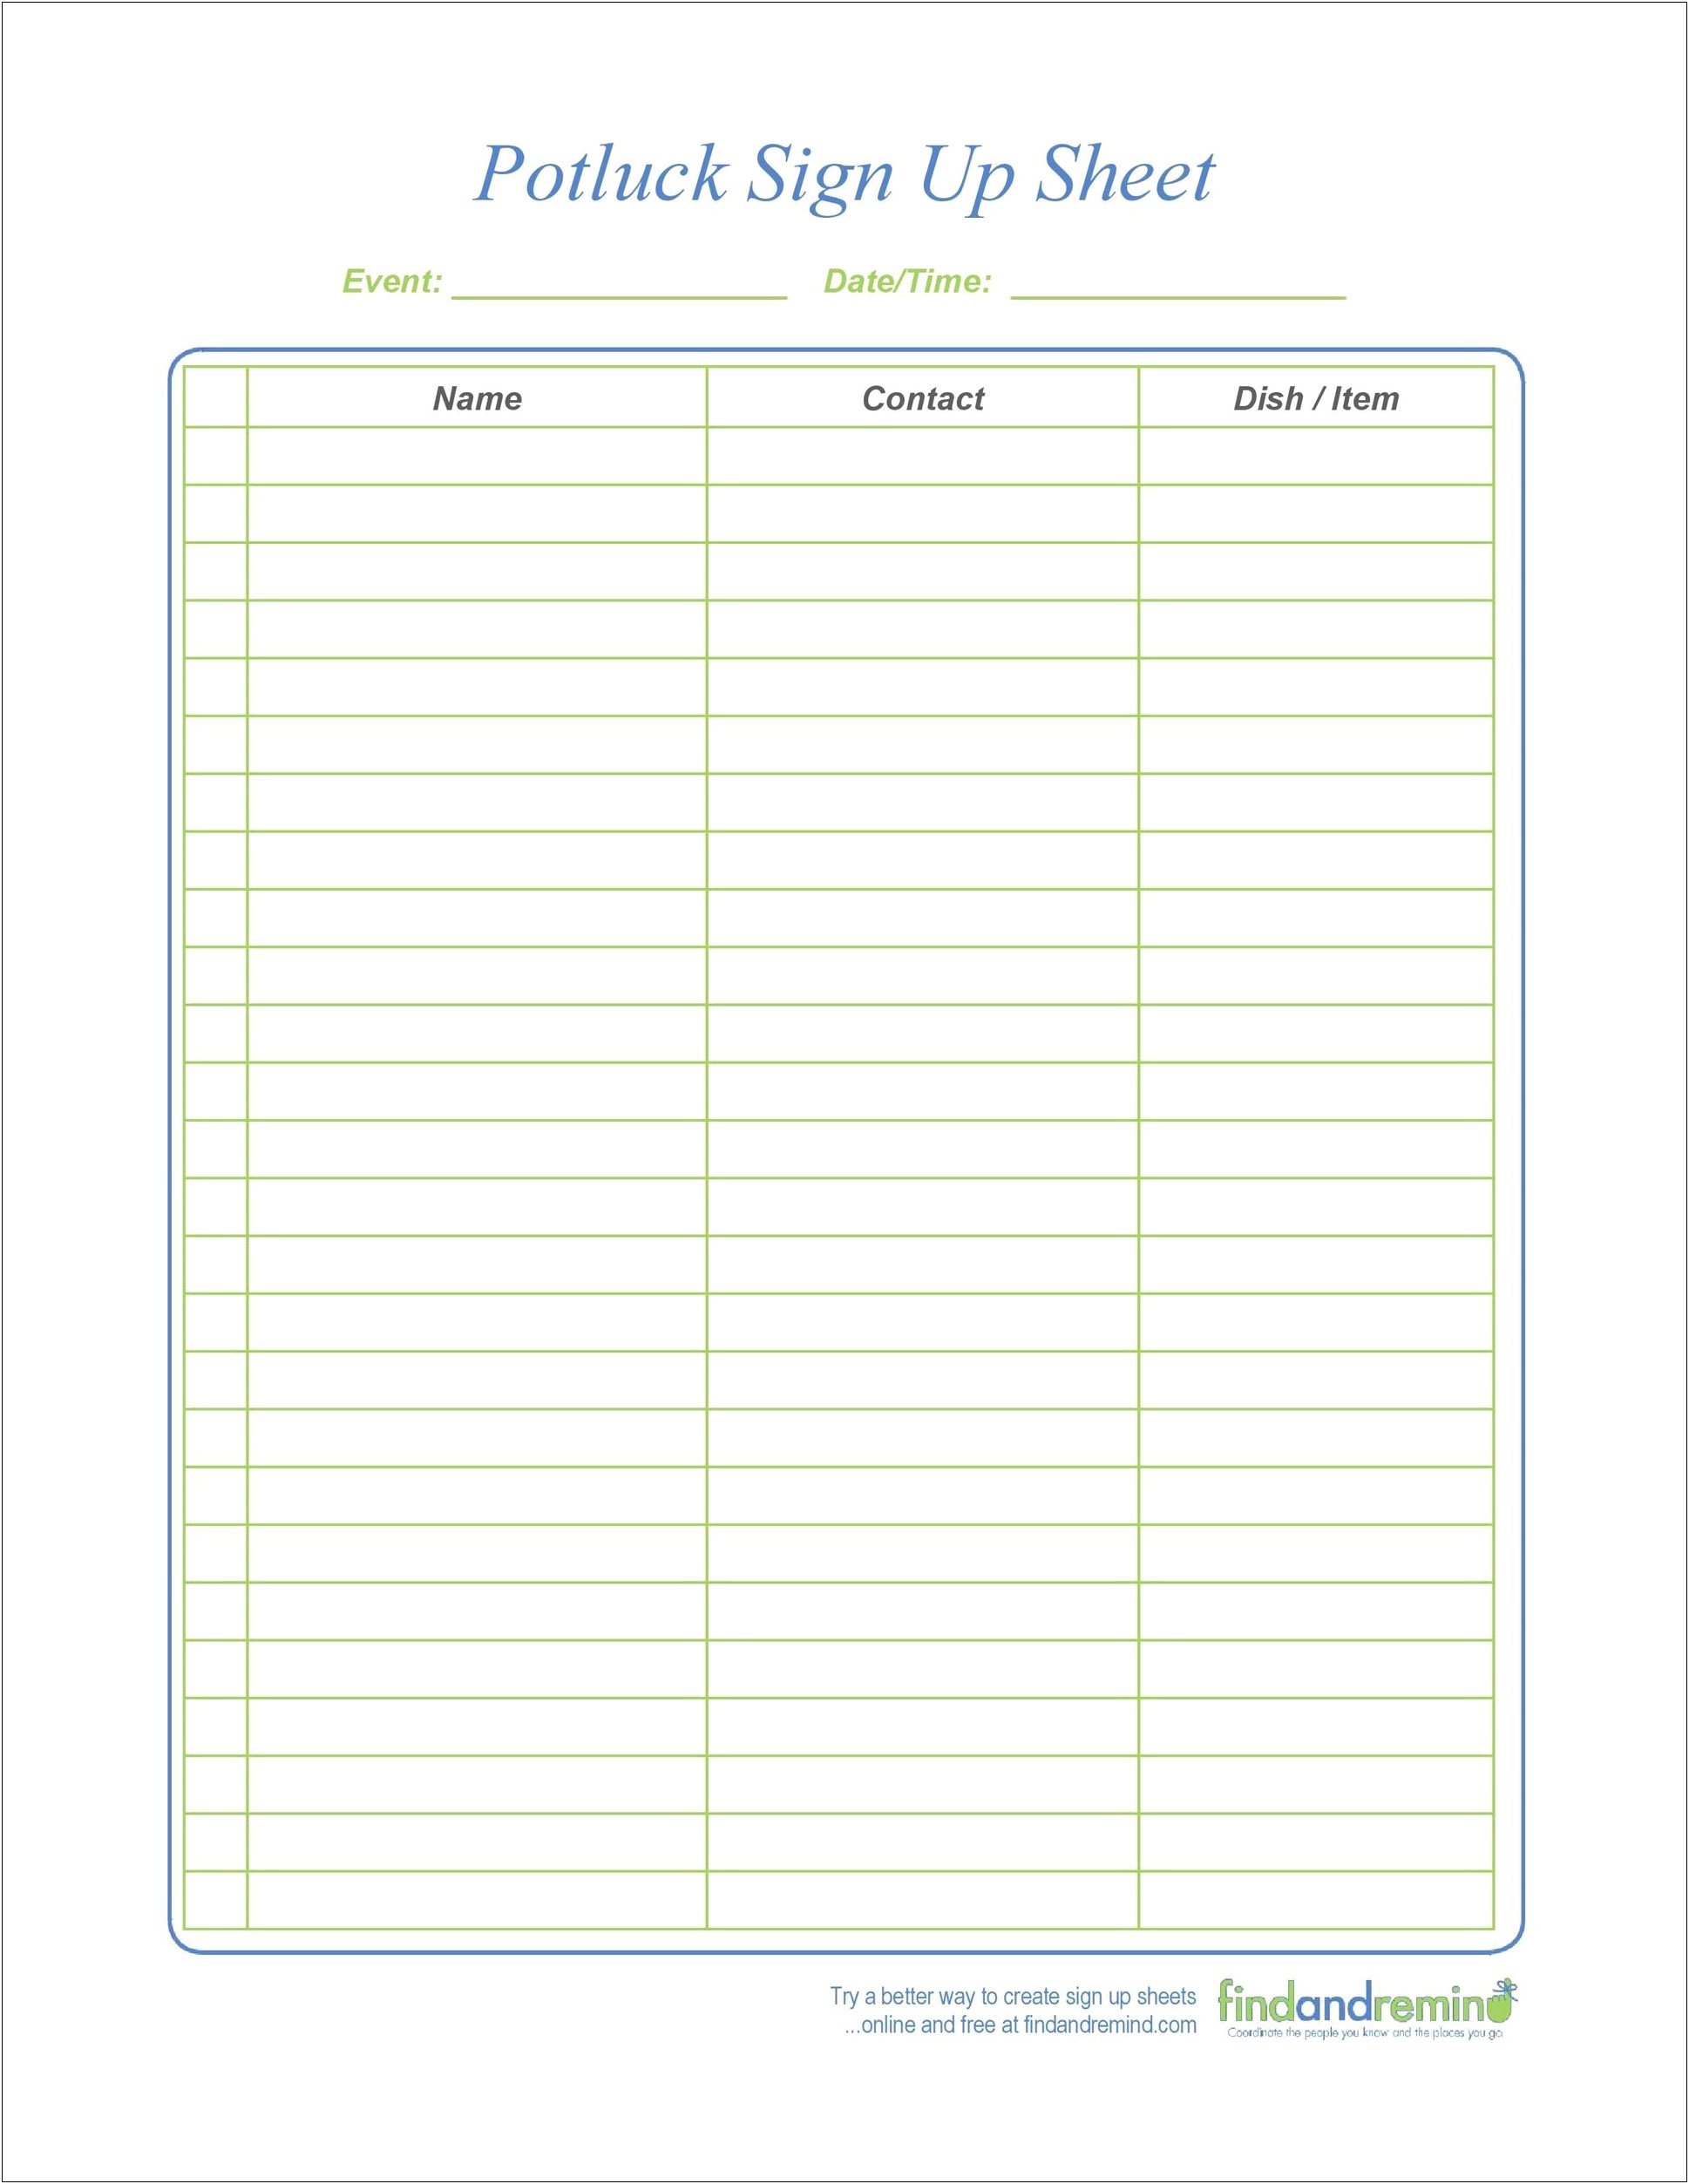 Potluck Sign Up Sheet Template Free Online